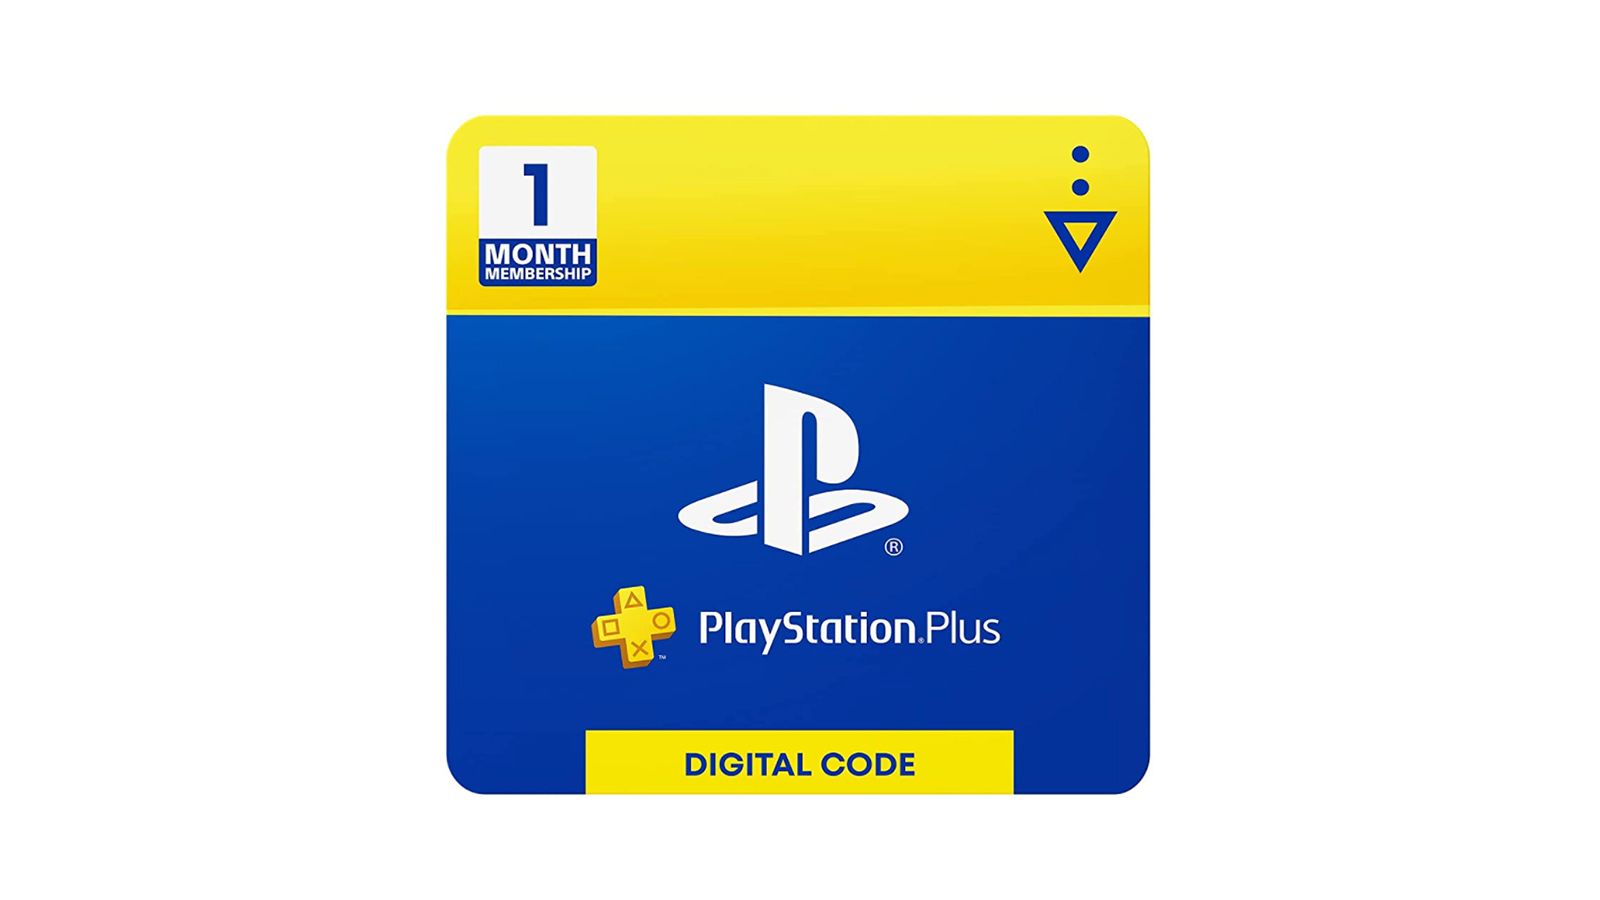 Playstation Plus subscription 365 days accessories Ps4 Fox consoles